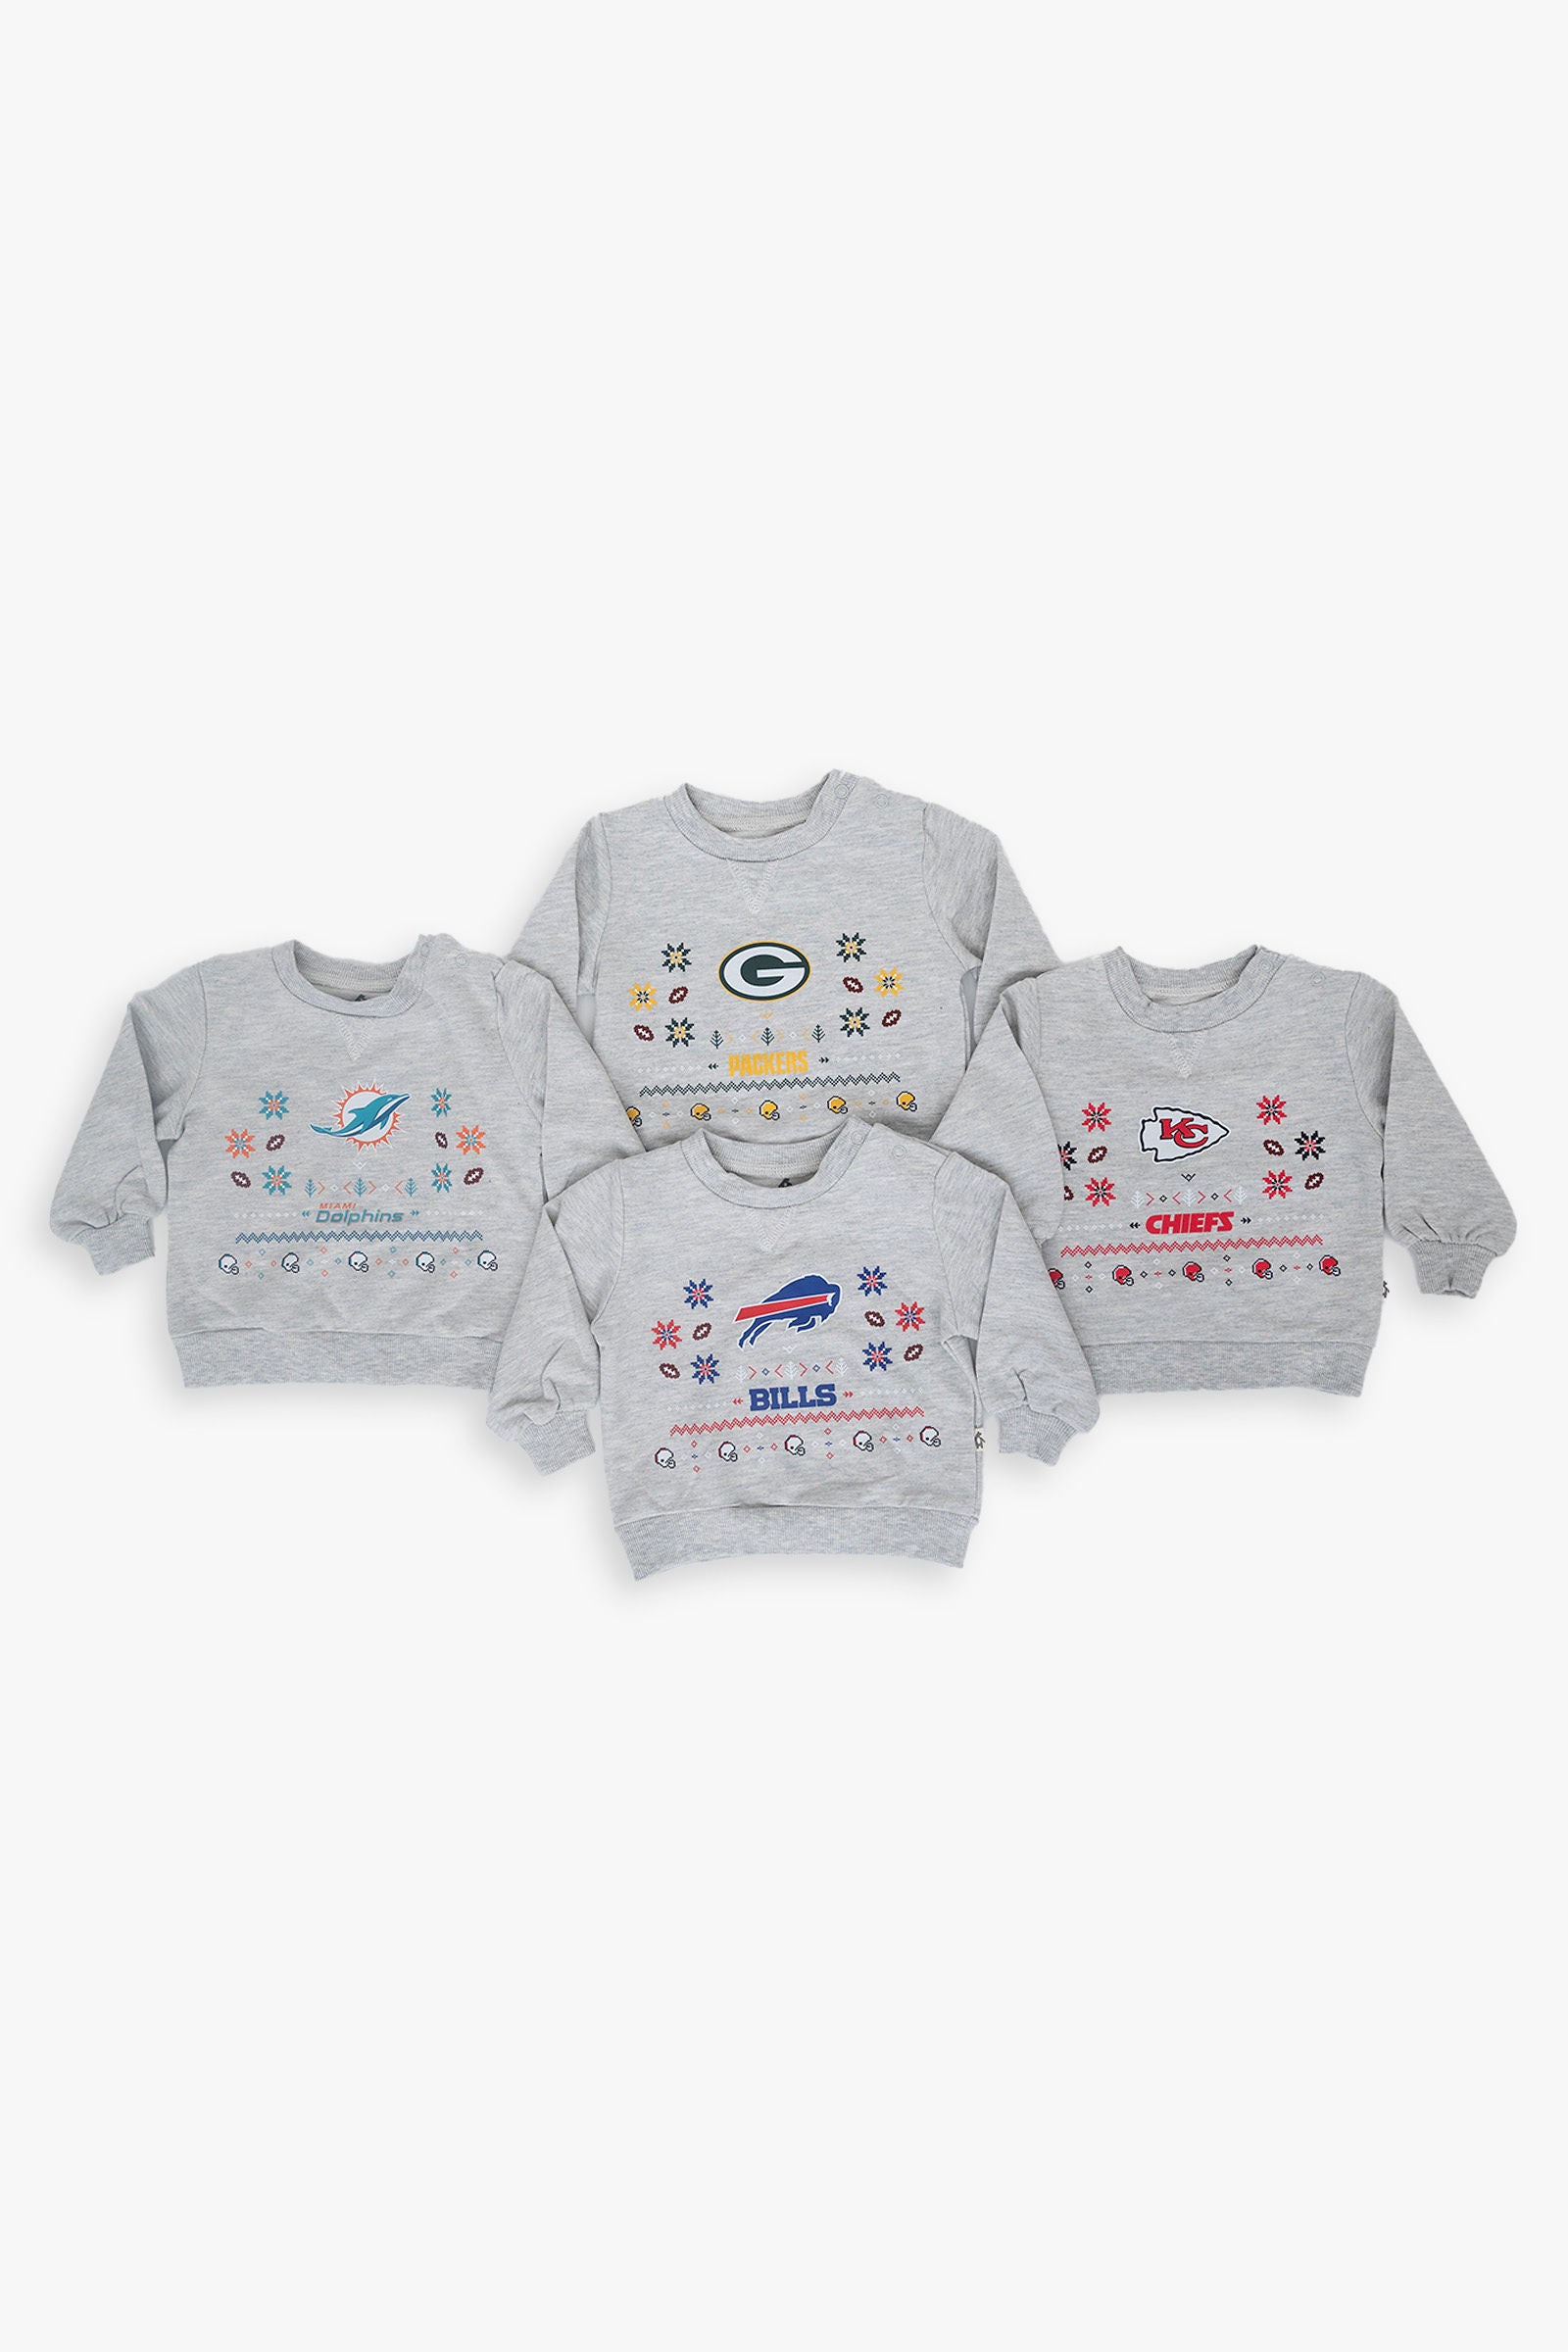 NFL Baby Ugly Holiday Sweater